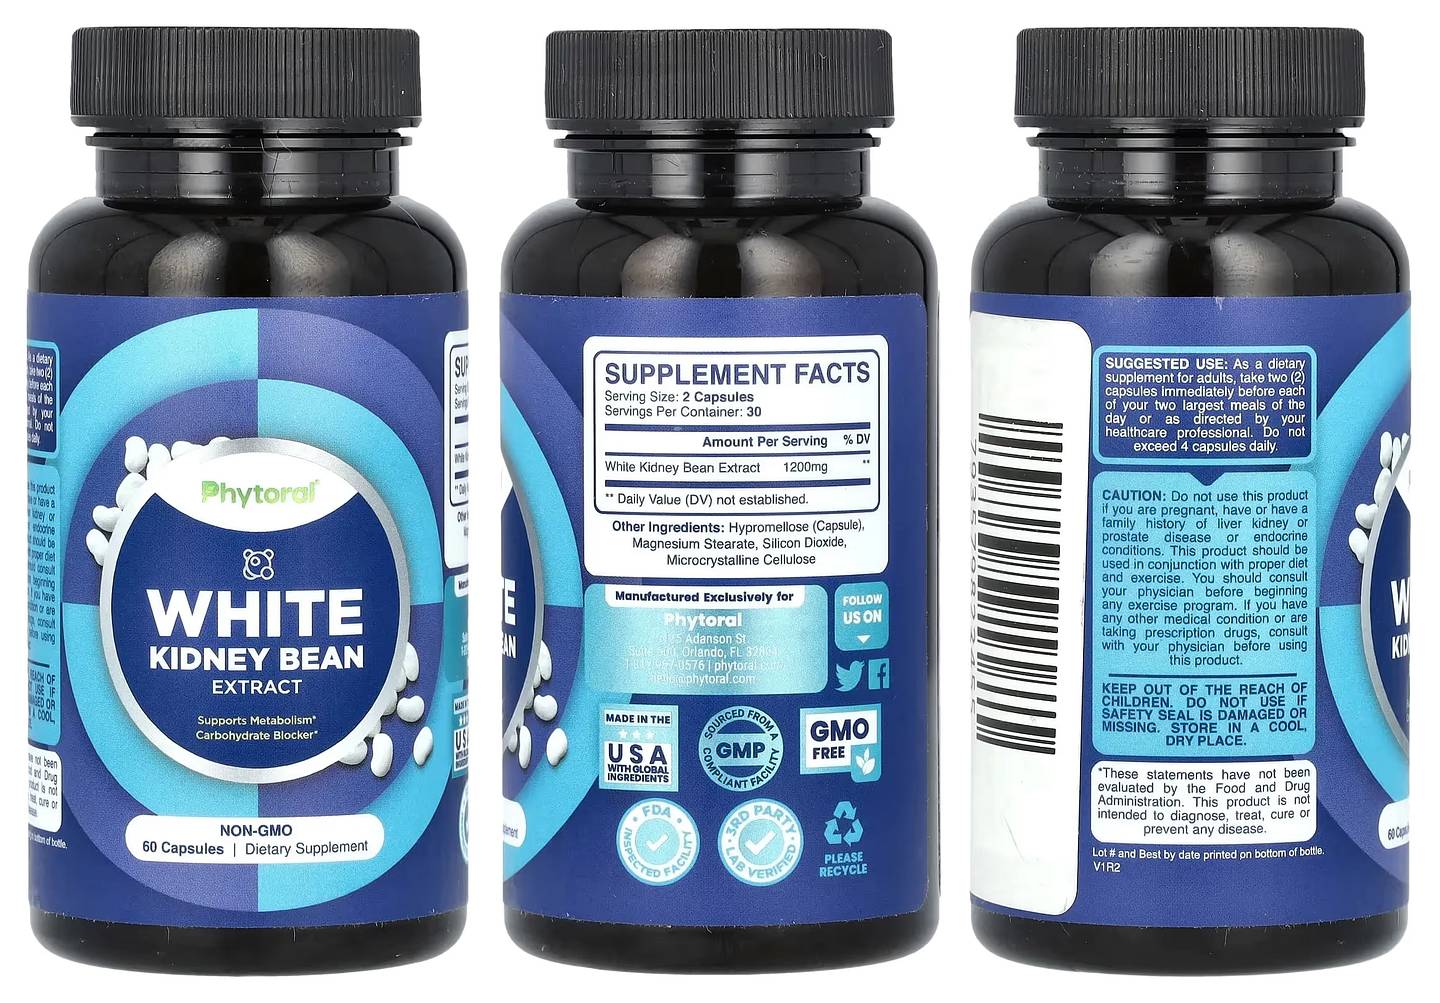 Phytoral, White Kidney Bean Extract packaging